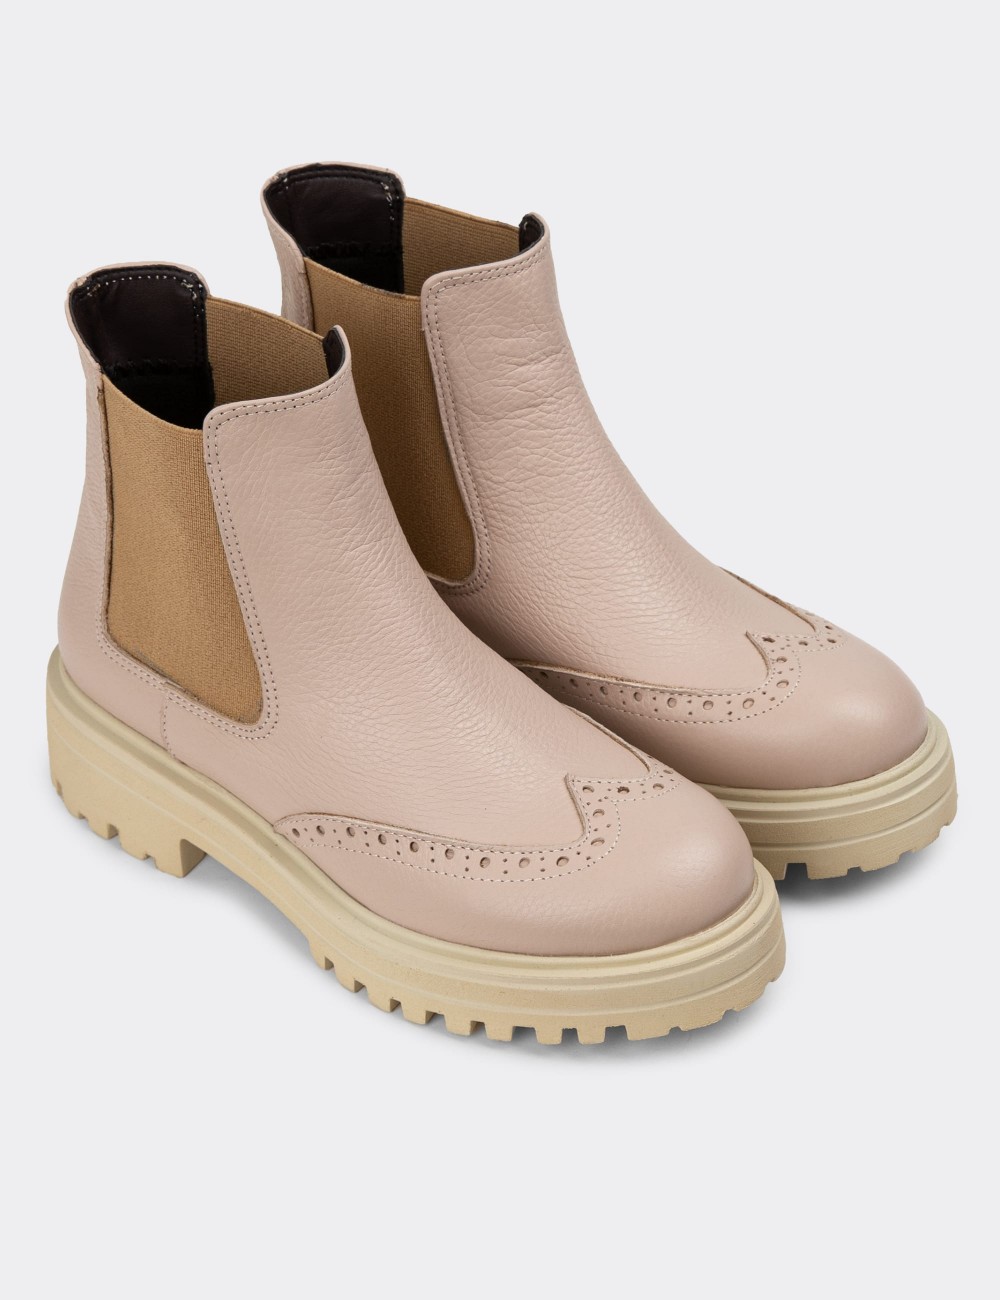 Beige Leather Chelsea Boots - 01800ZBEJE03